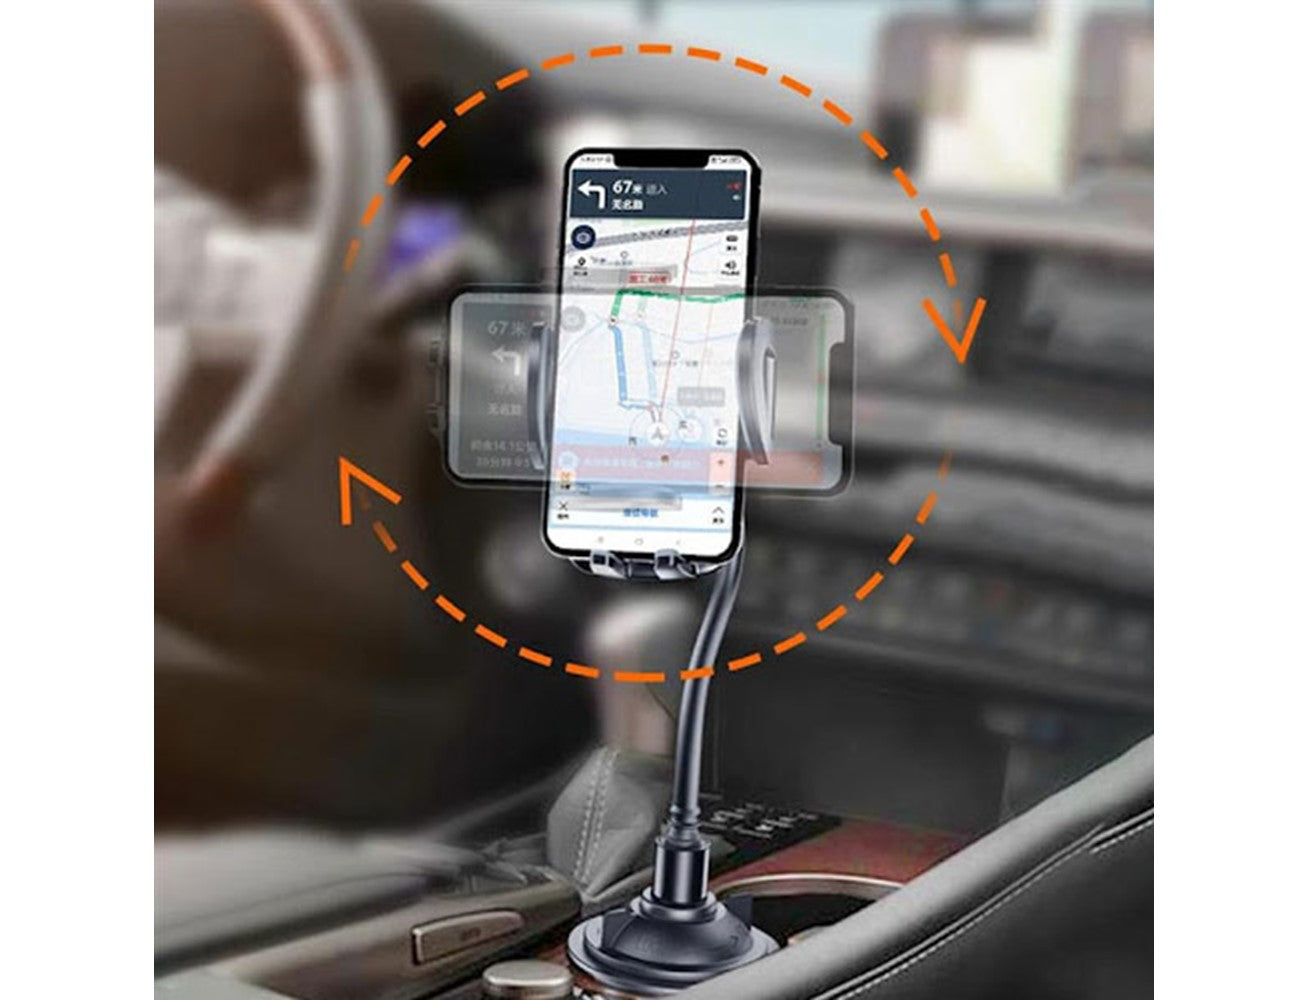 Choetech Yesido C112 Car Cup Holder For All Smart Phones